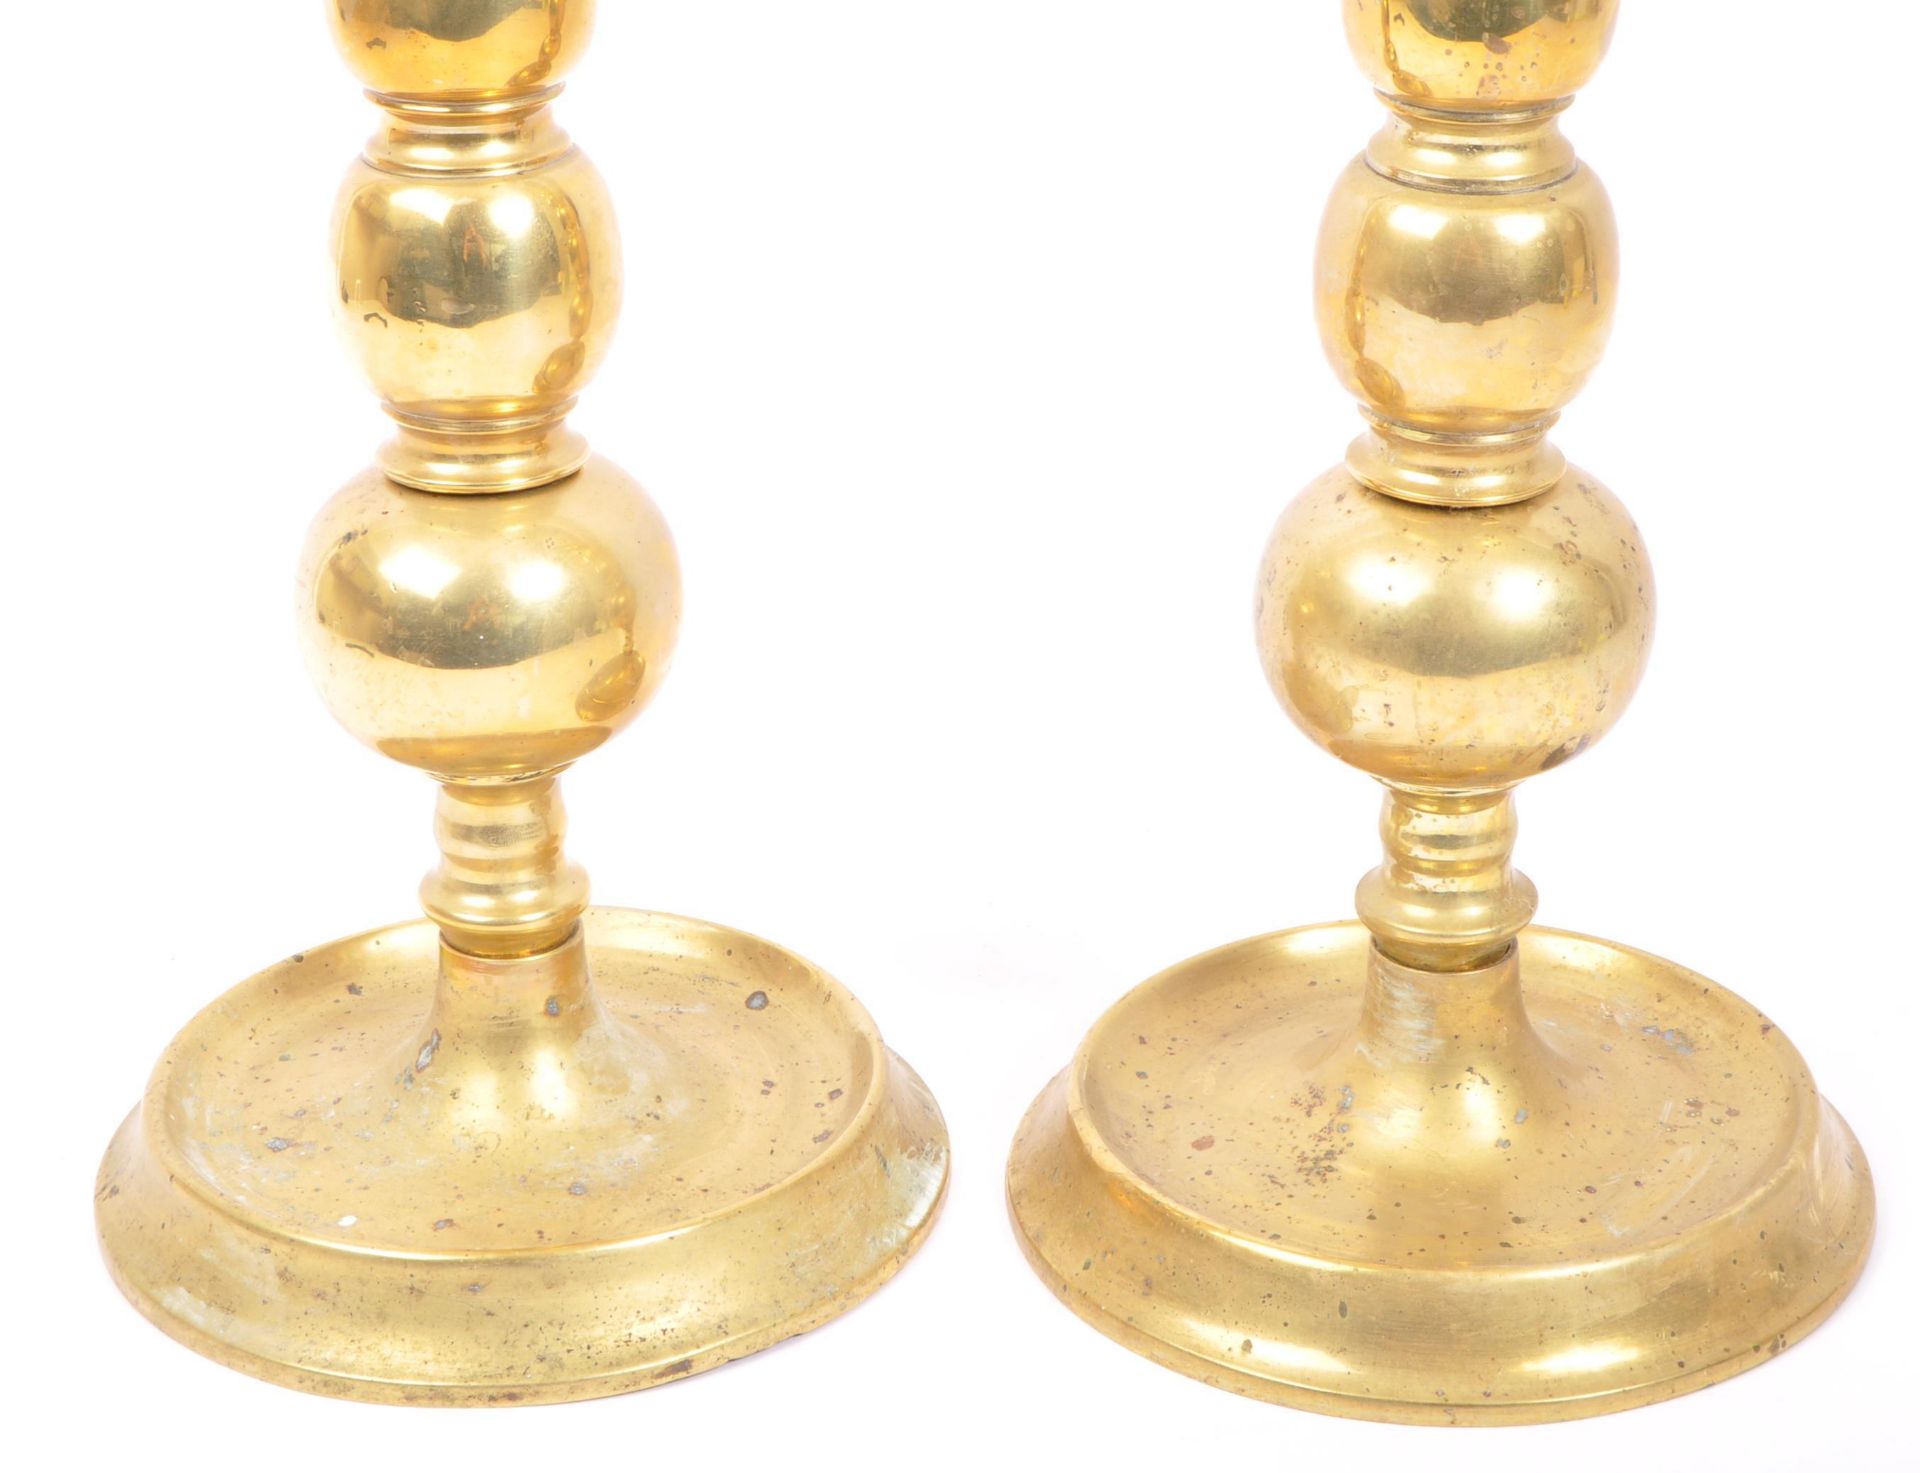 PAIR OF 19TH CENTURY BOBBIN TURNED EFFECT BRASS CANDLESTICKS - Image 2 of 6